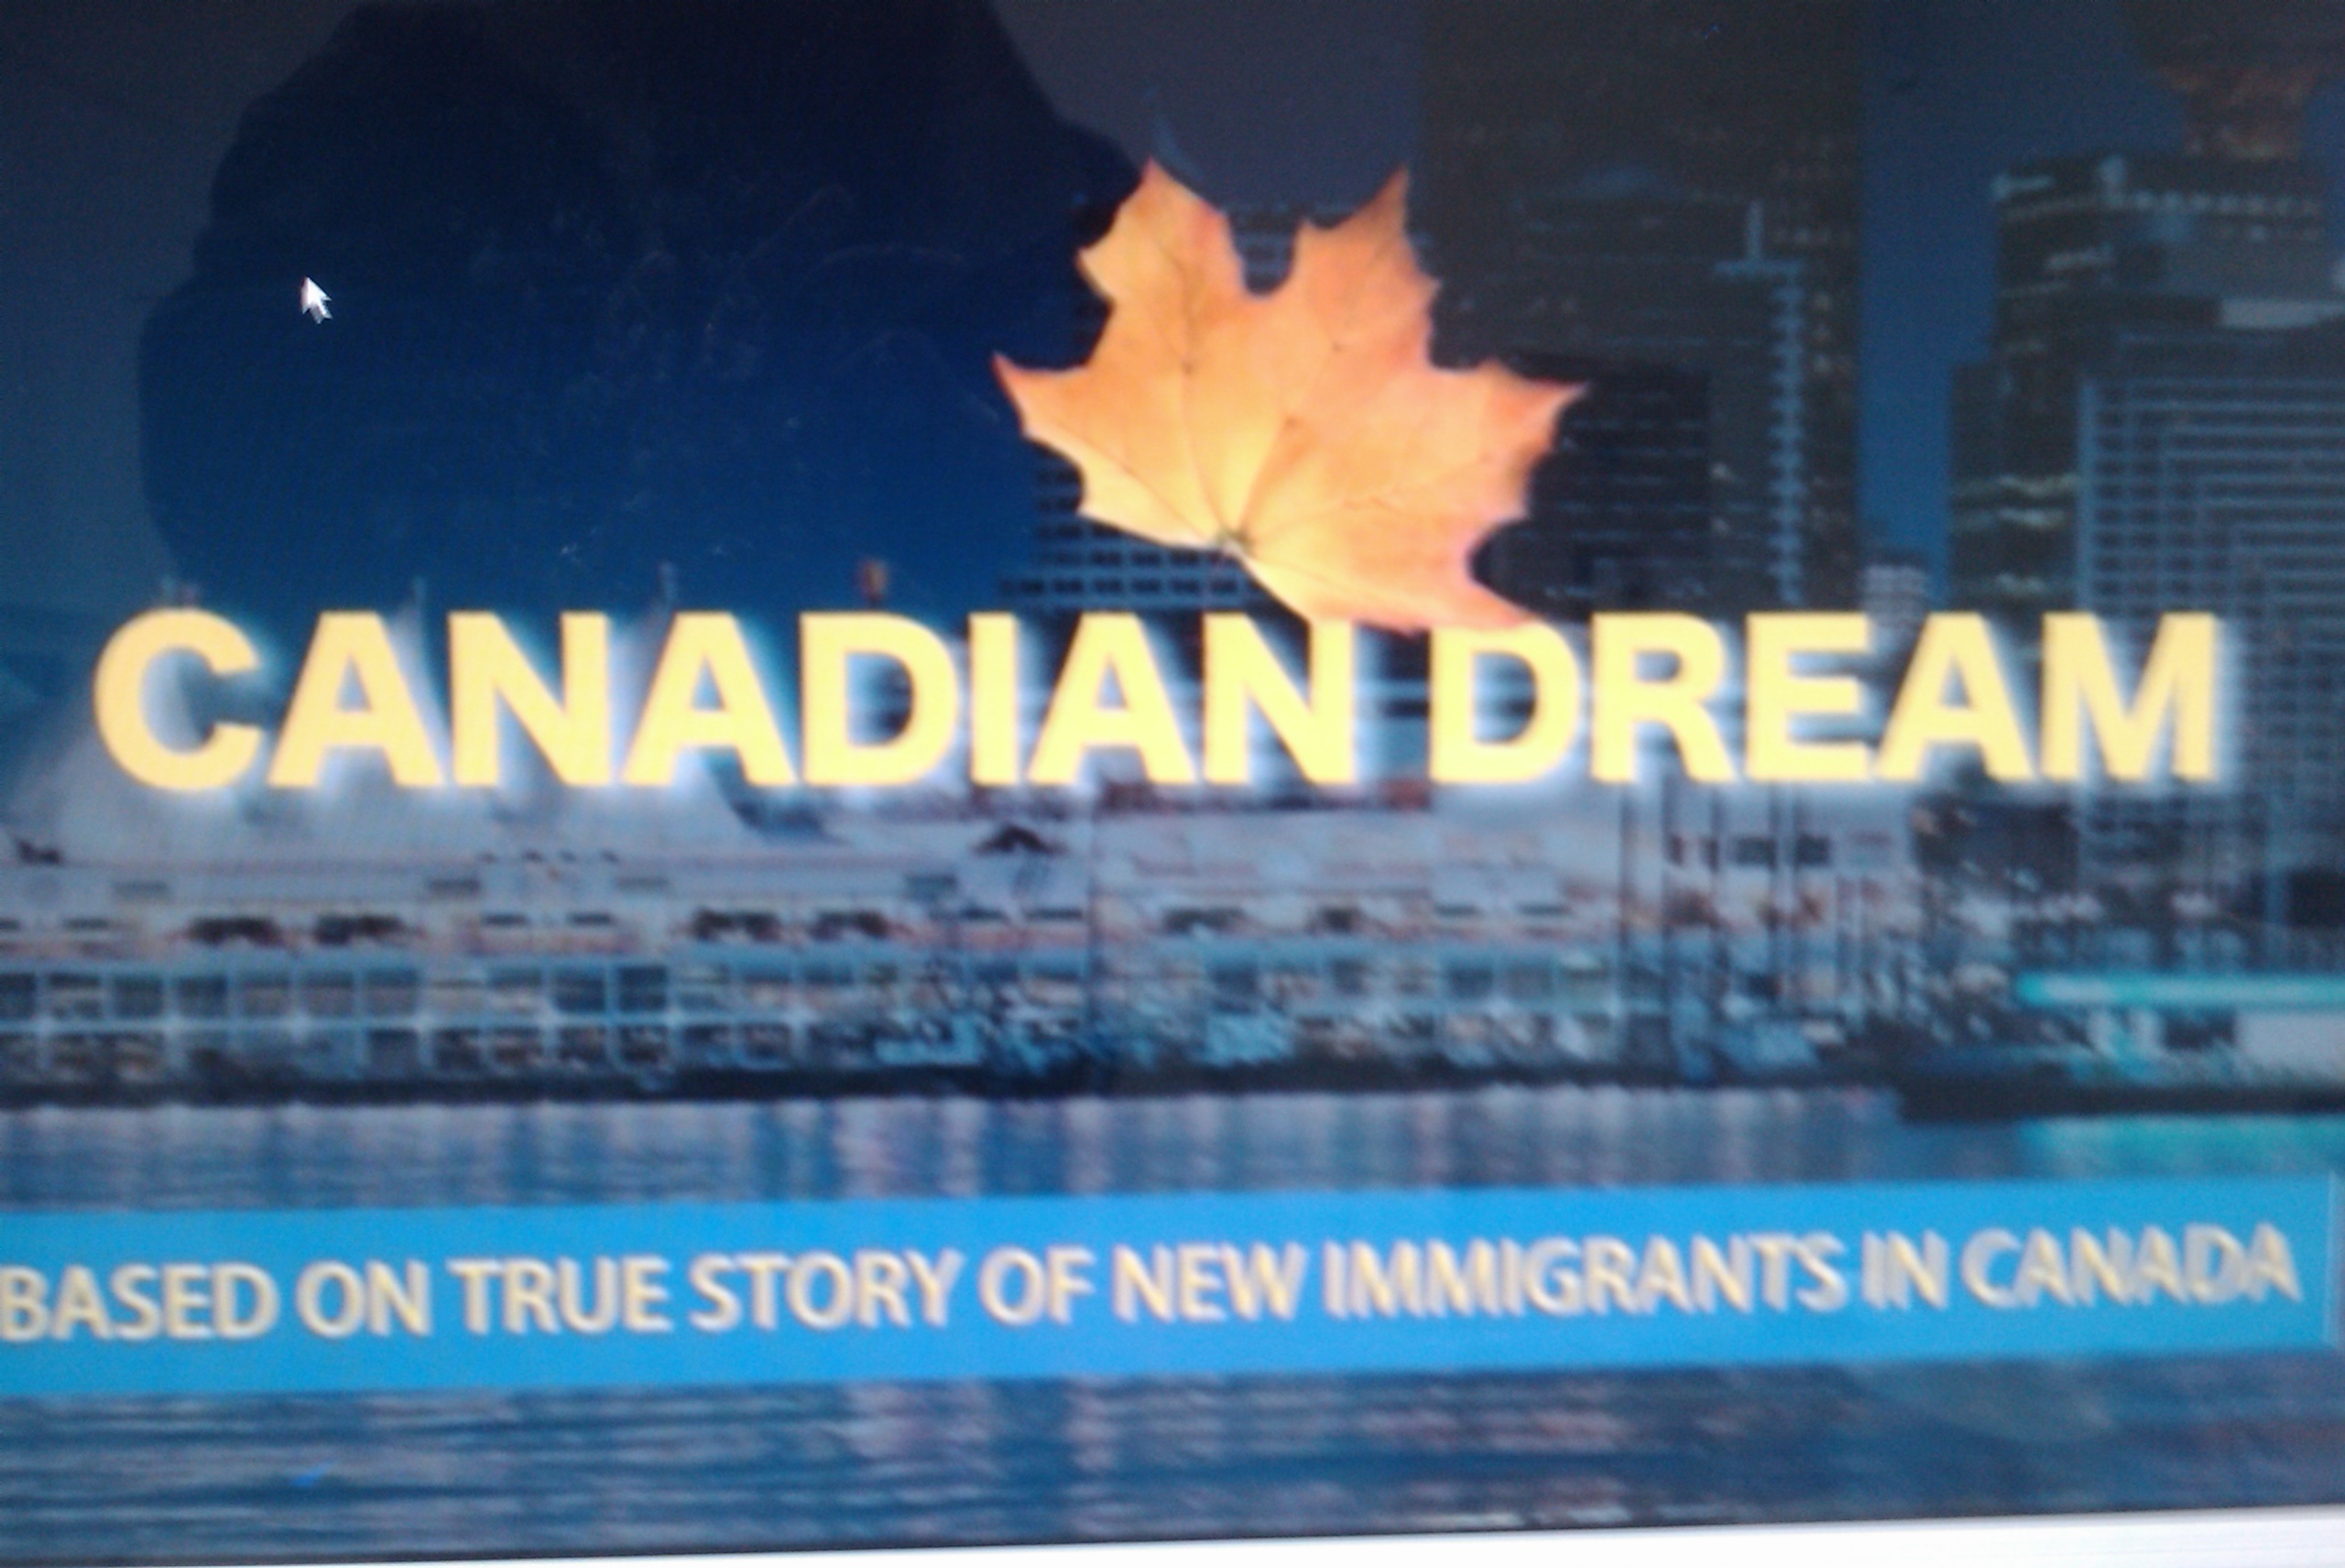 CANADIAN DREAM, based on true story Dil Punjabi, new immigrants in Canada.